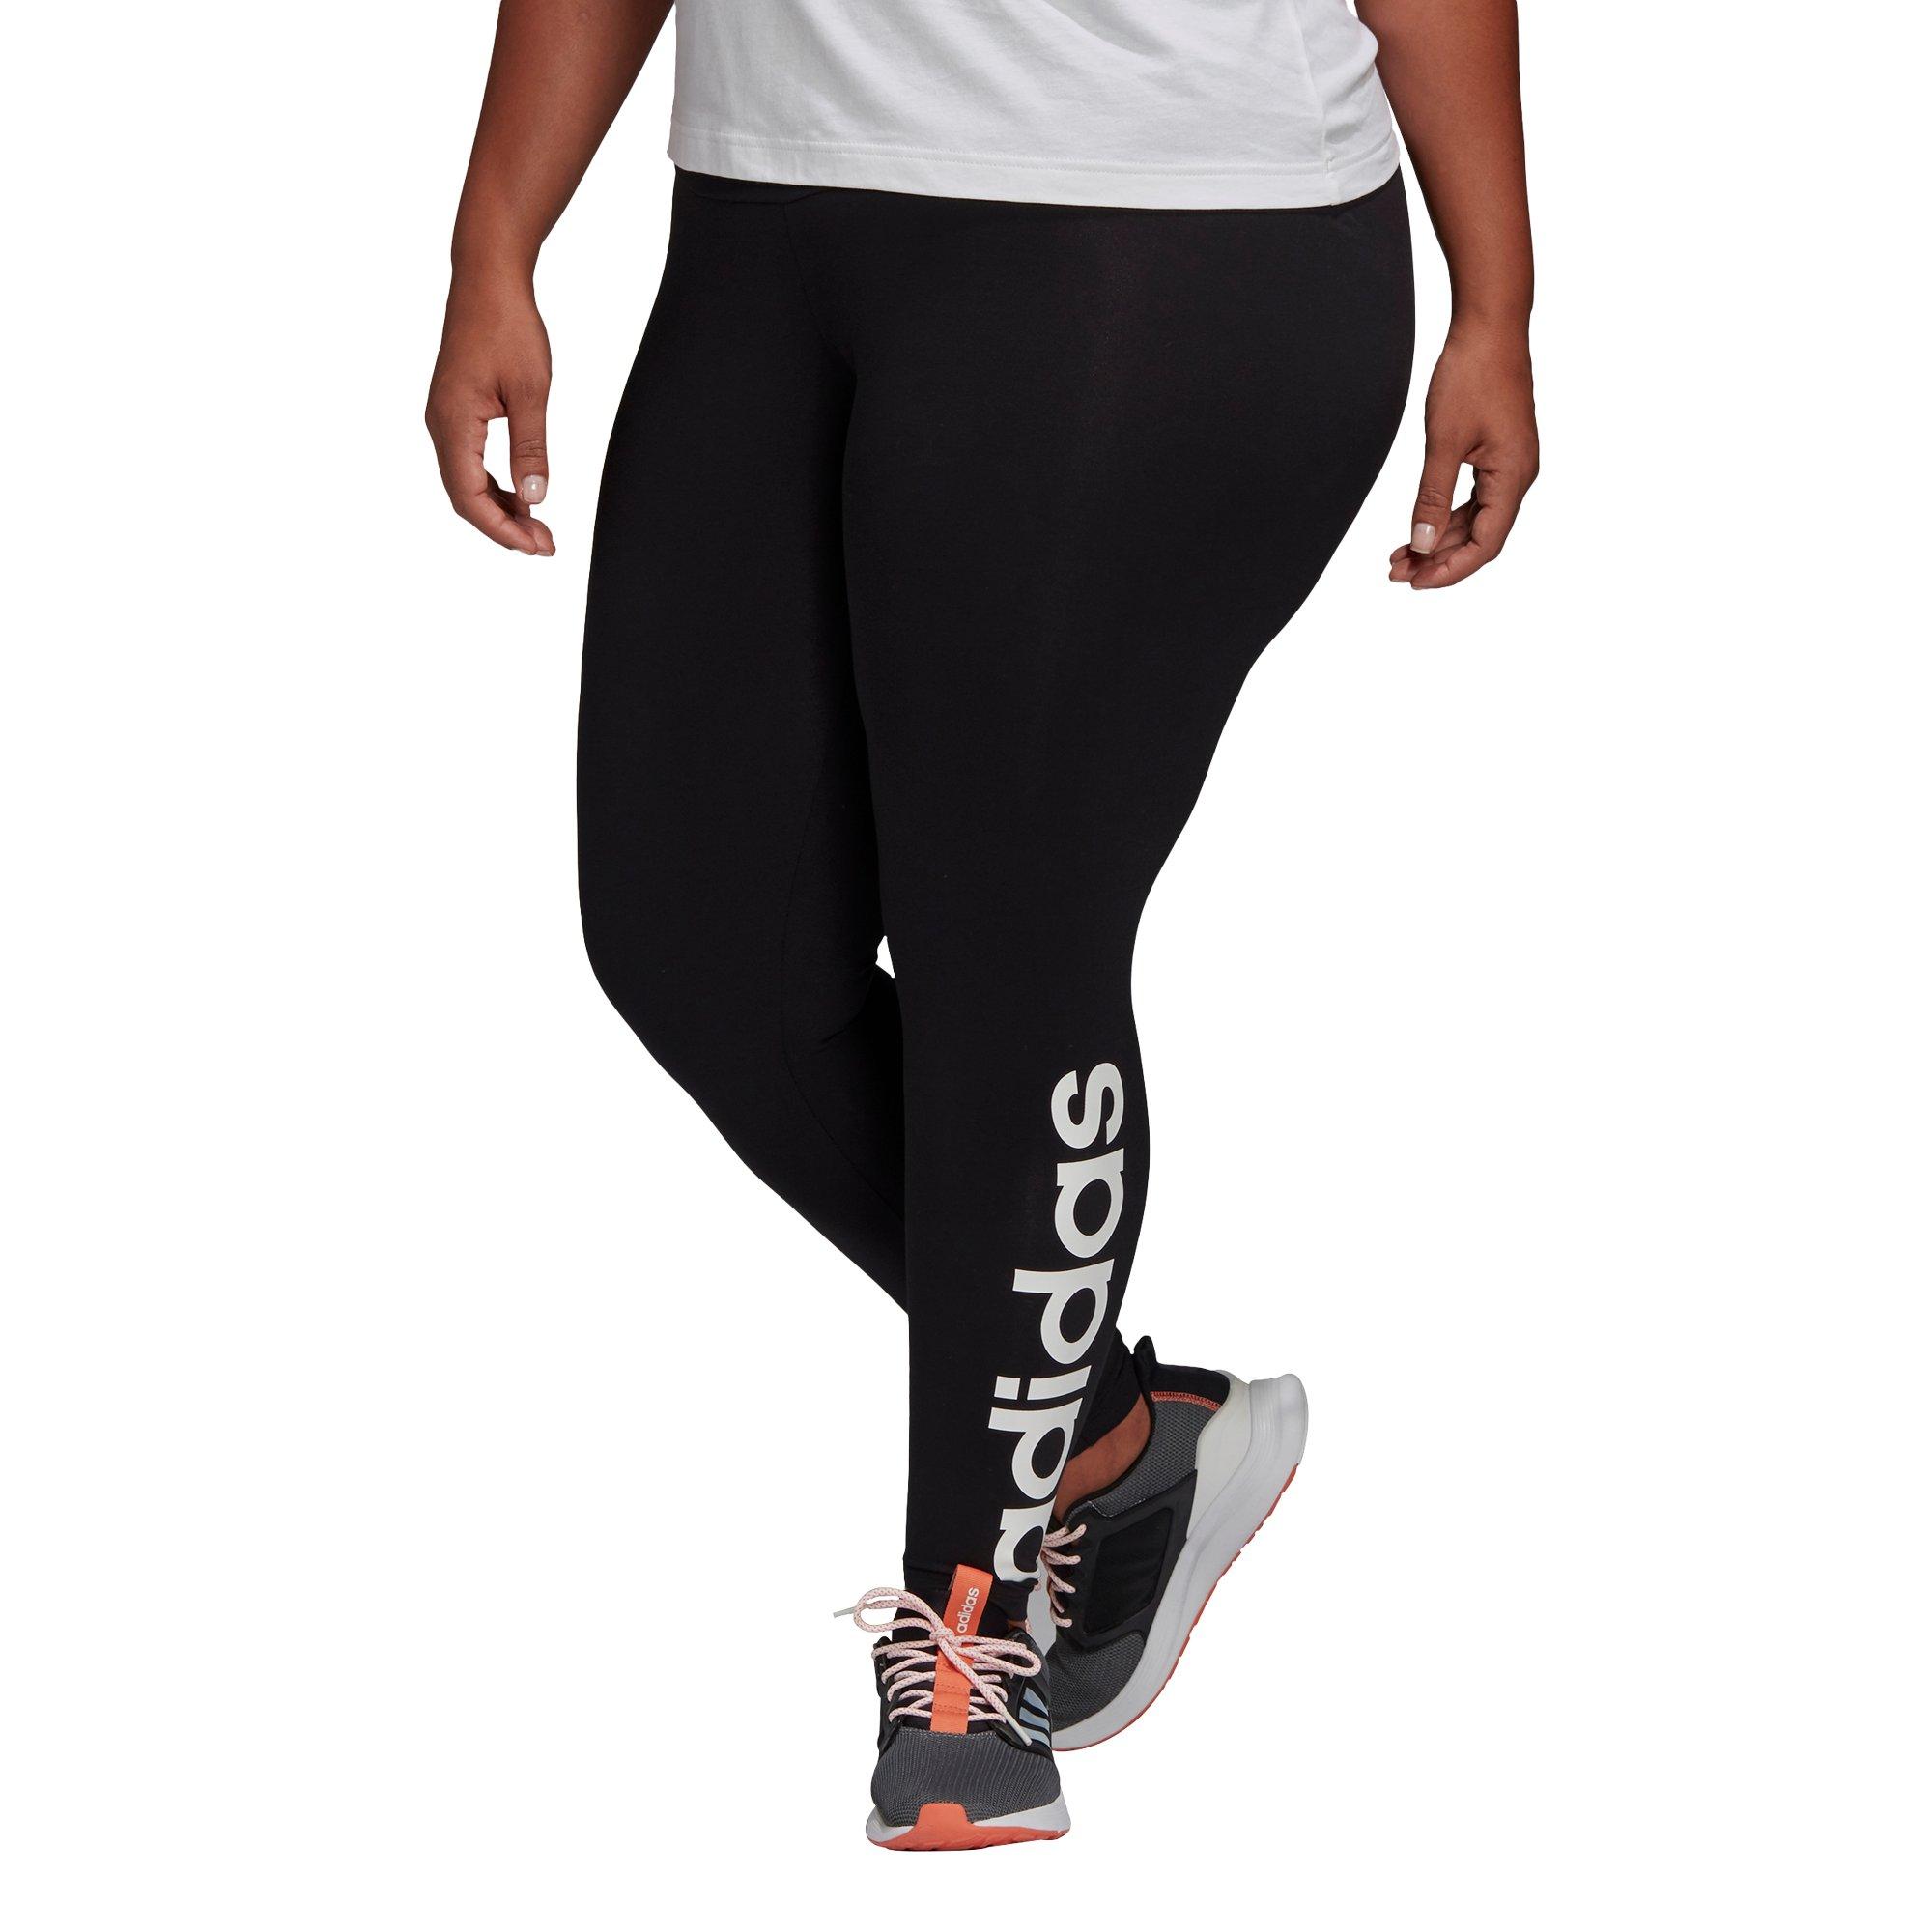 adidas plus size outfit